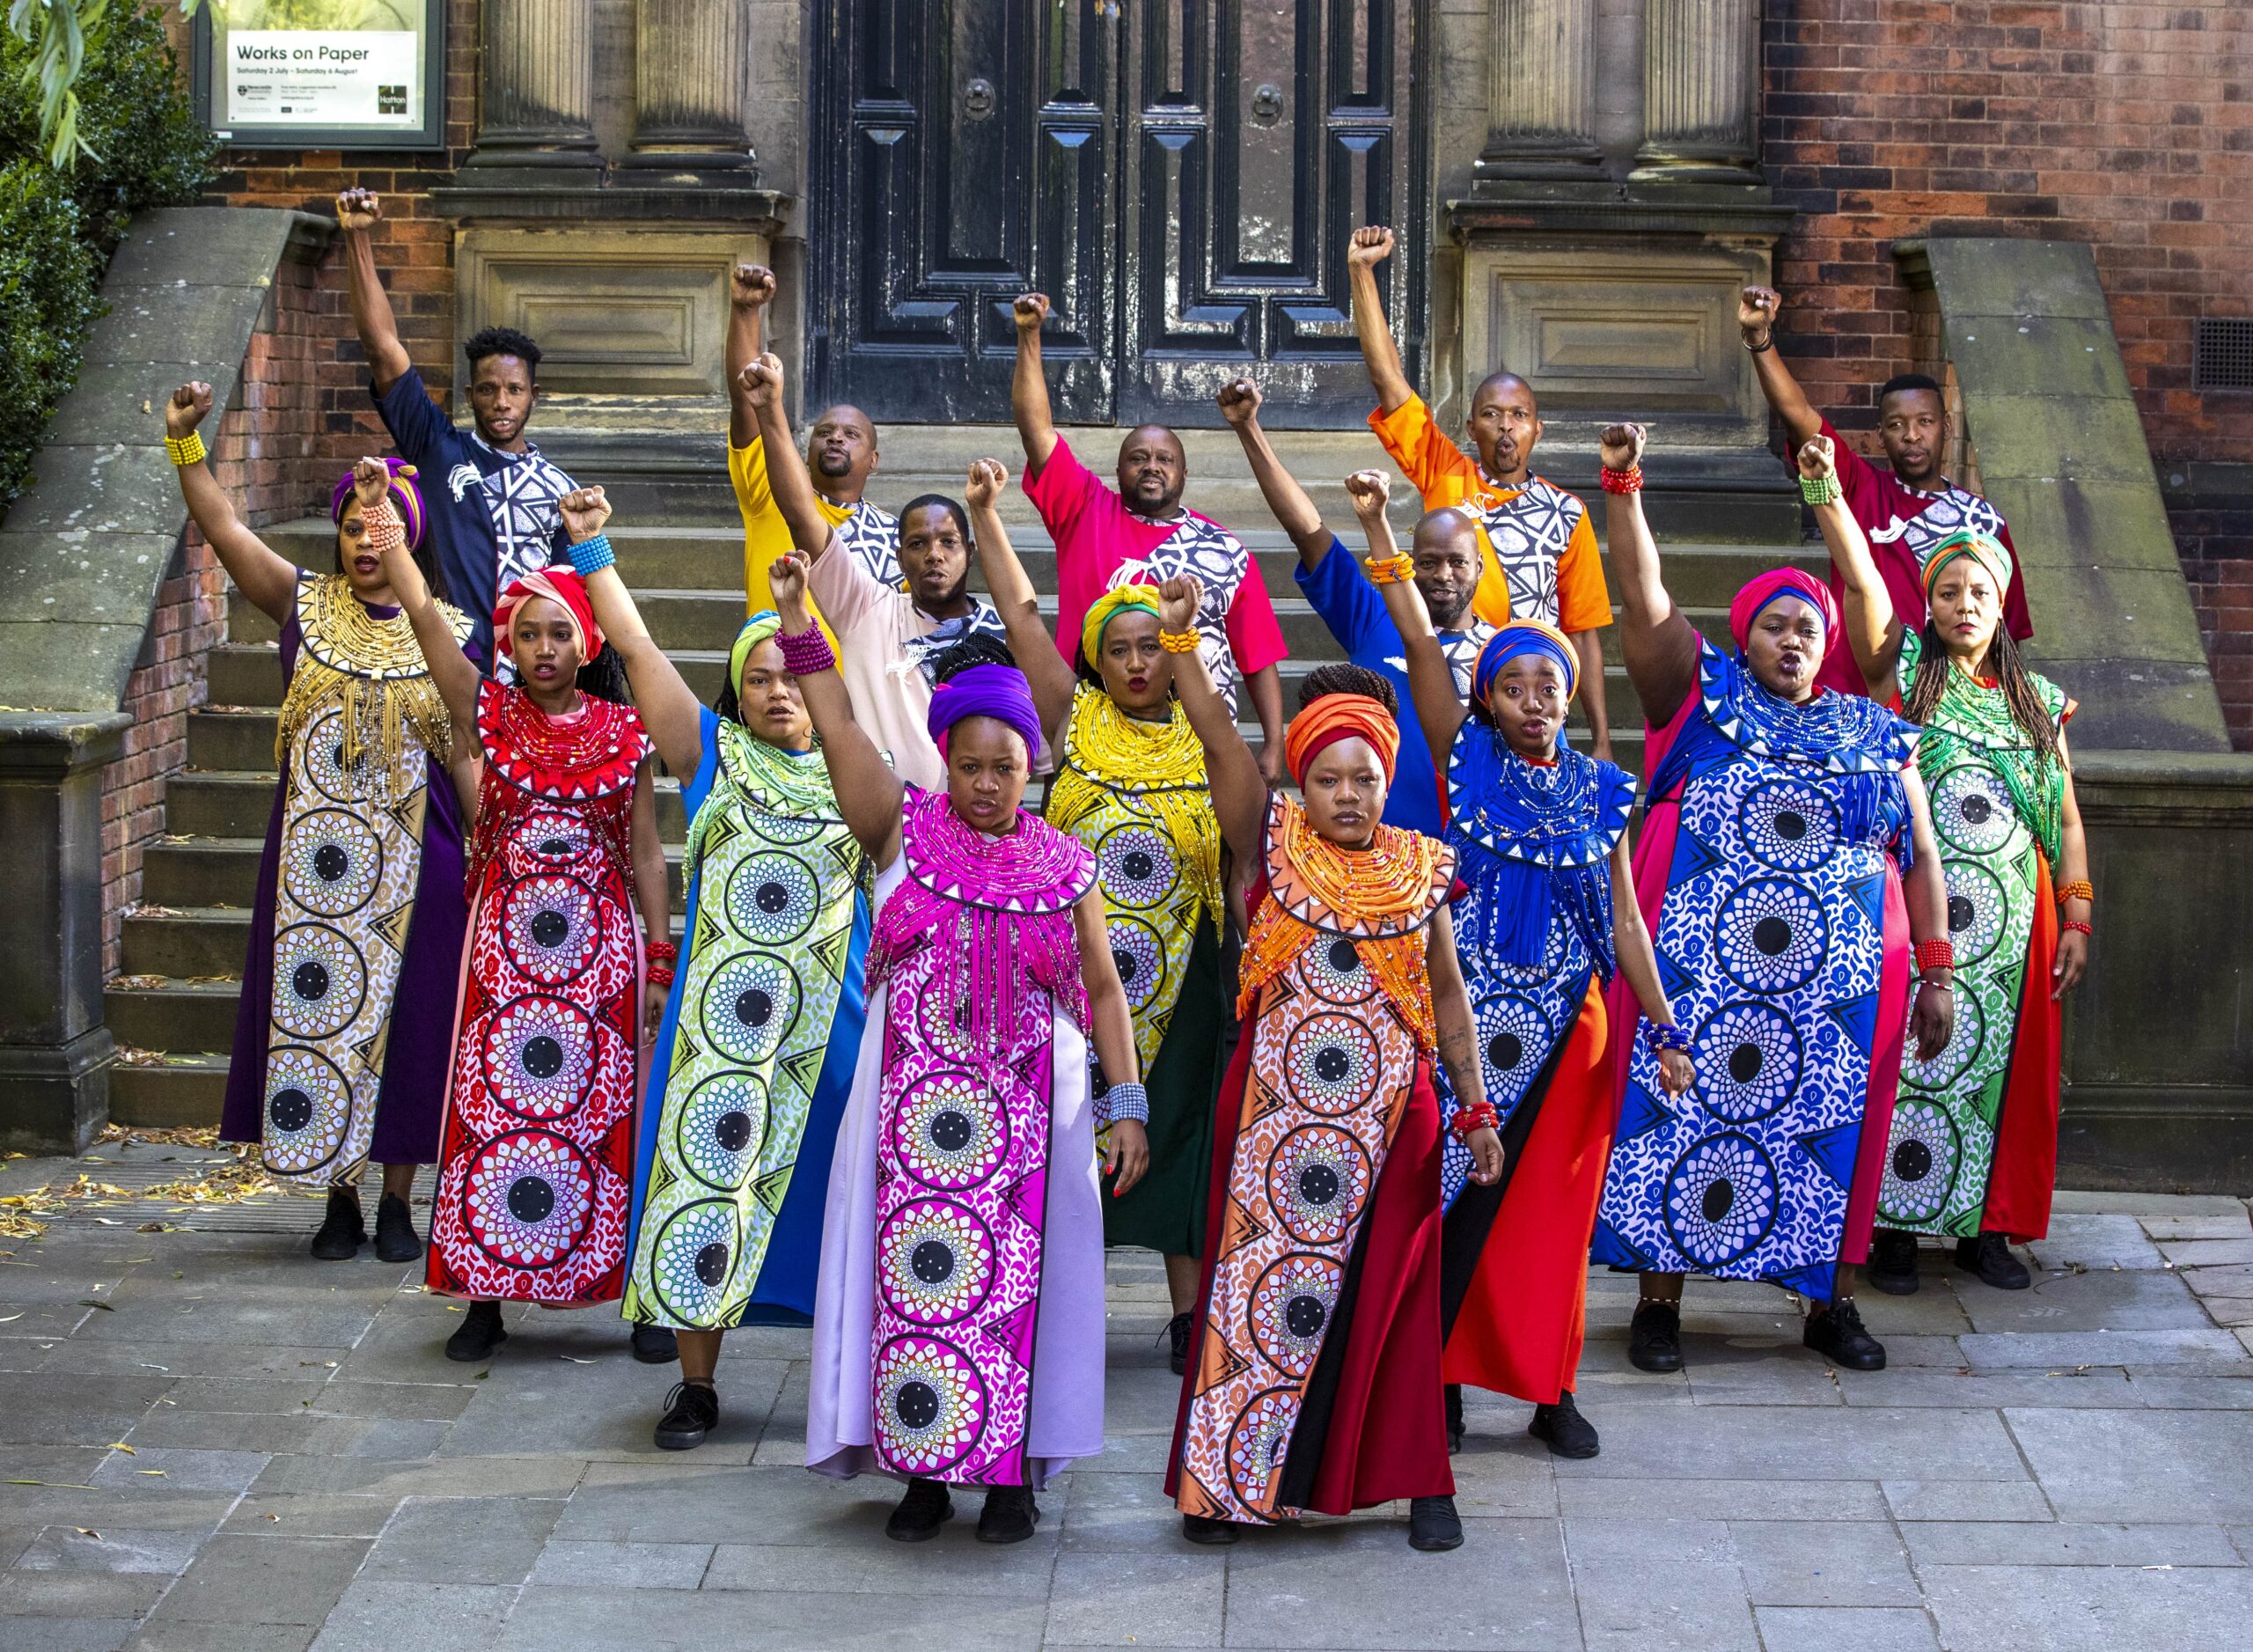 Members of Soweto Gospel Choir in colorful traditional dress stand with their fists in the air.